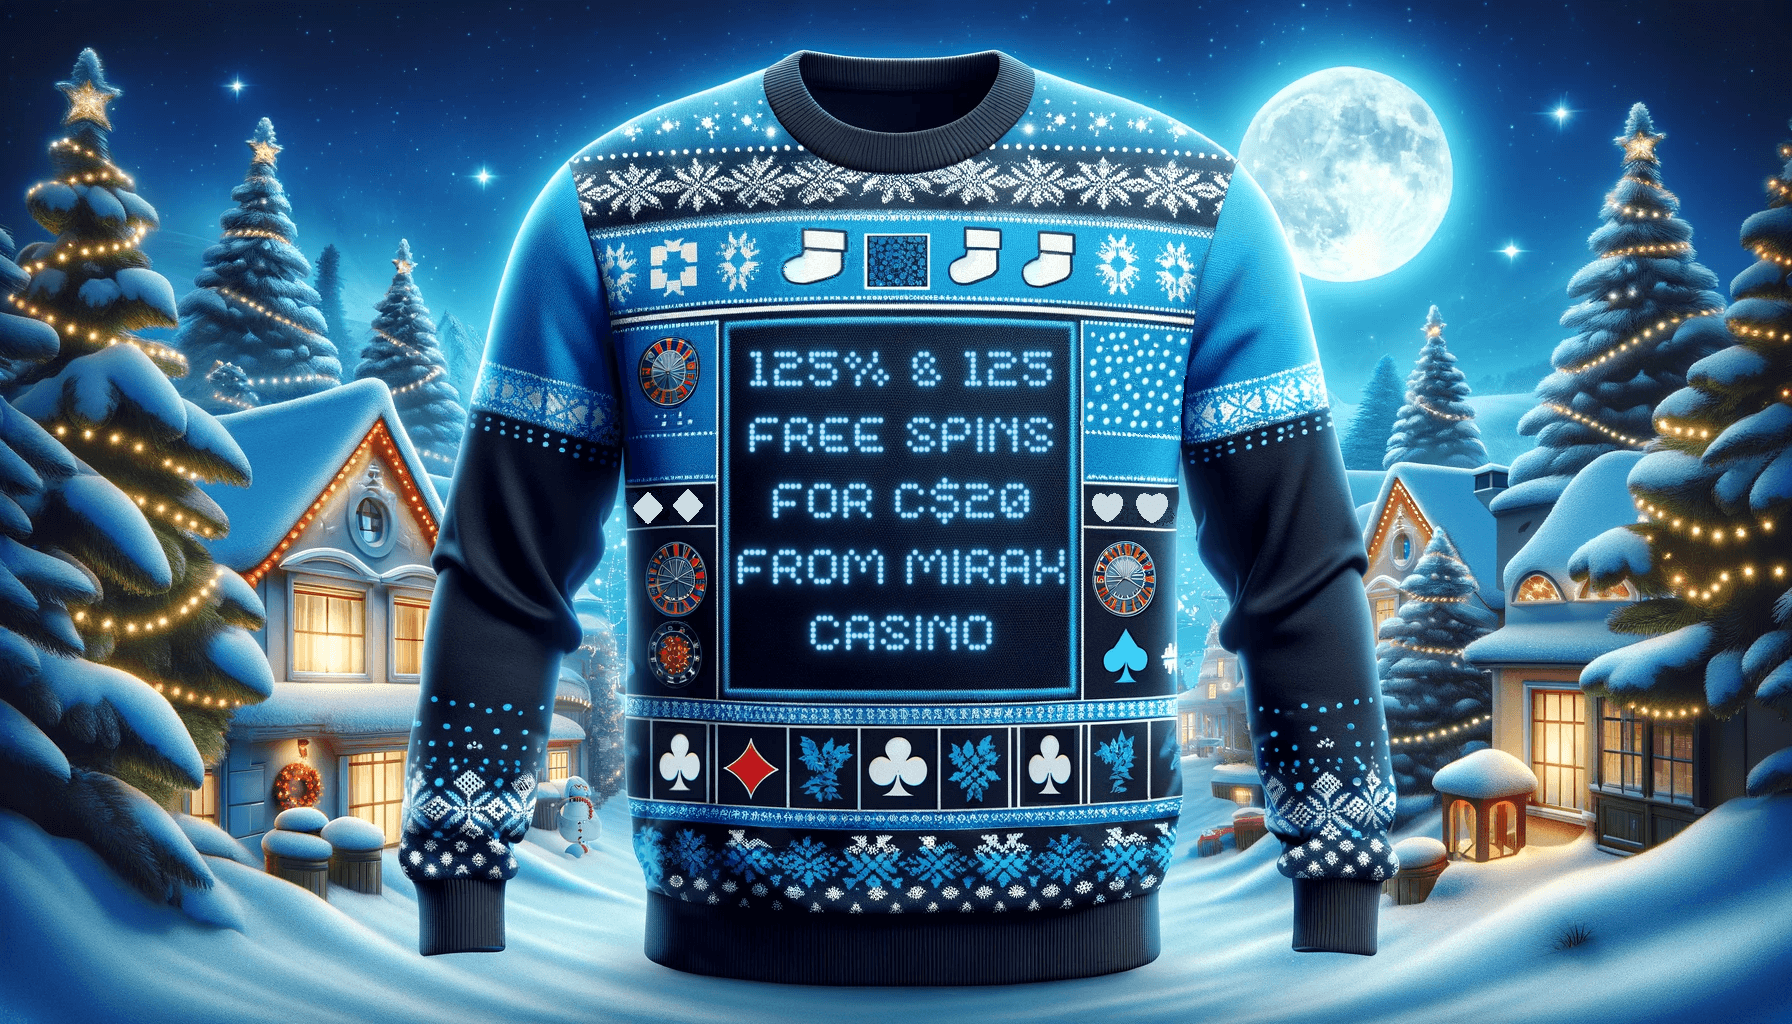 A Christmas sweater bears the message: 125% and 125 Free Spins for C$20 from Mirax Casino